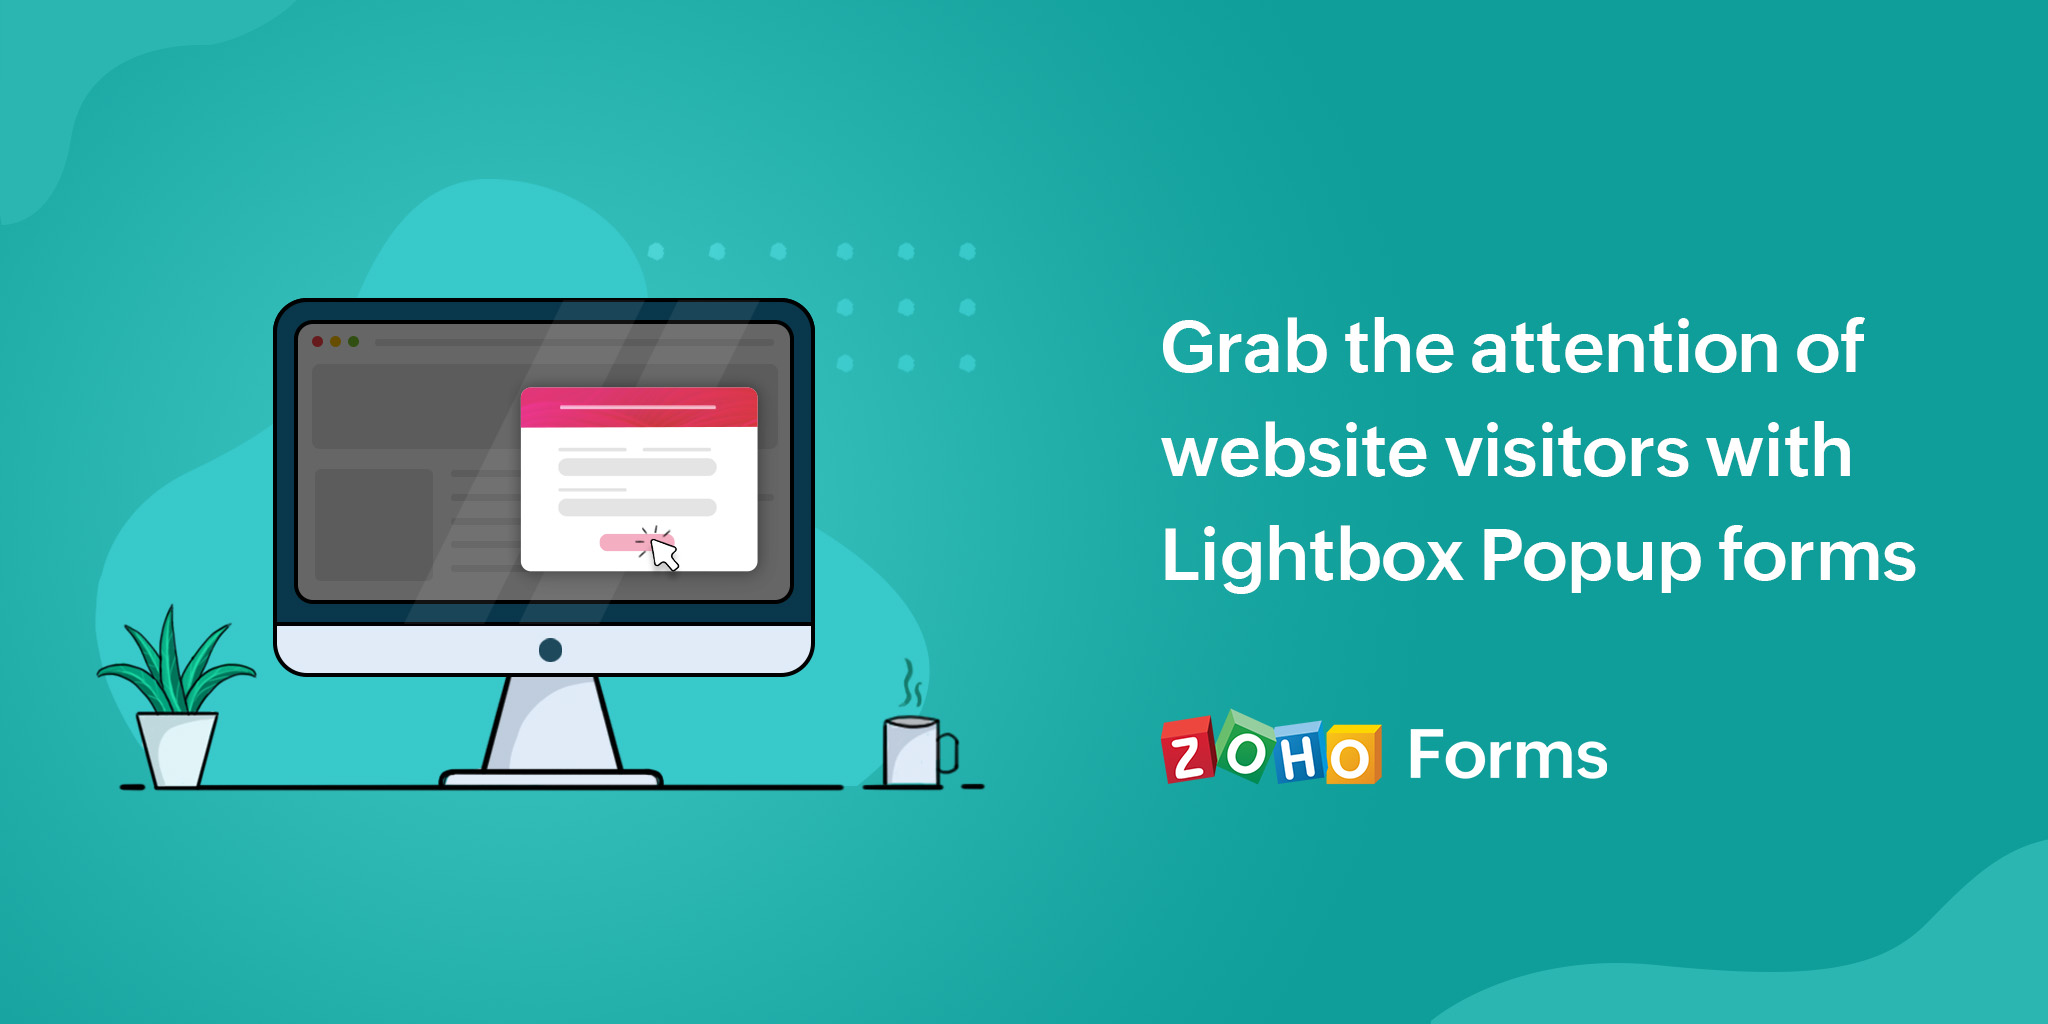 Lightbox Forms: A Powerful Tool to Boost Your Website's Conversion Rate